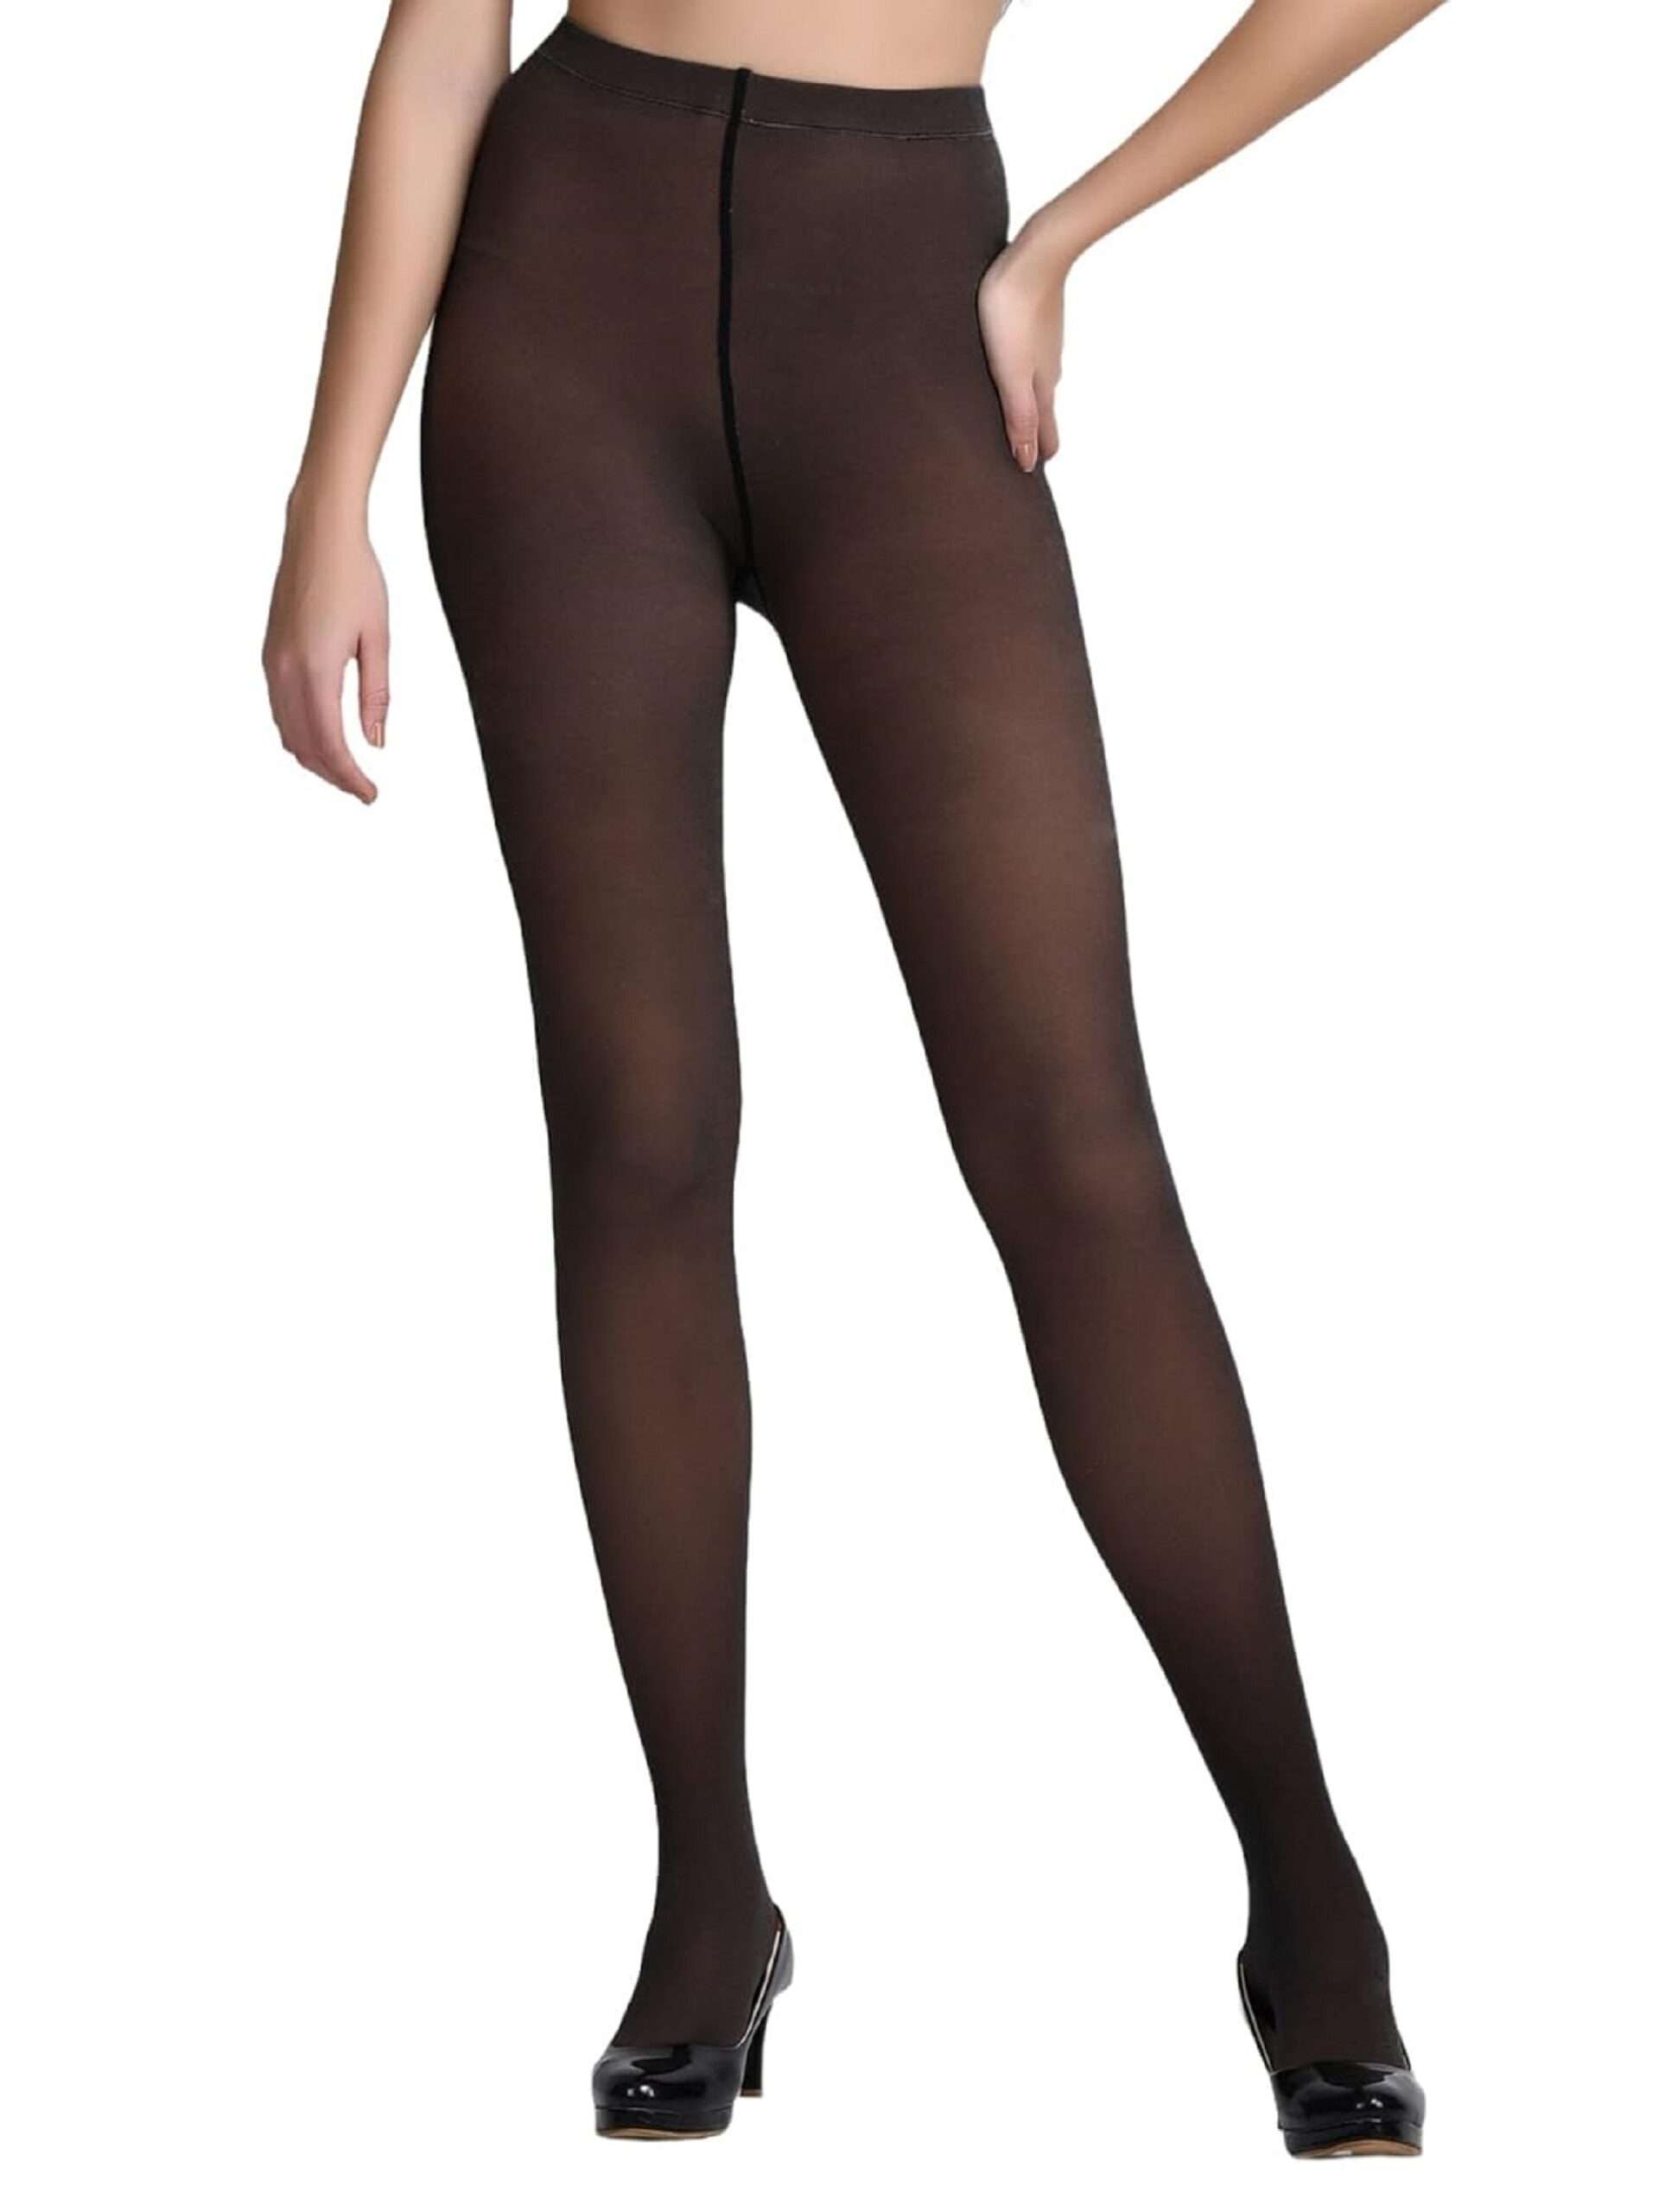 Women's Fleece Lined Tights Thermal Pantyhose Leggings Free Size Black  Color Black Color